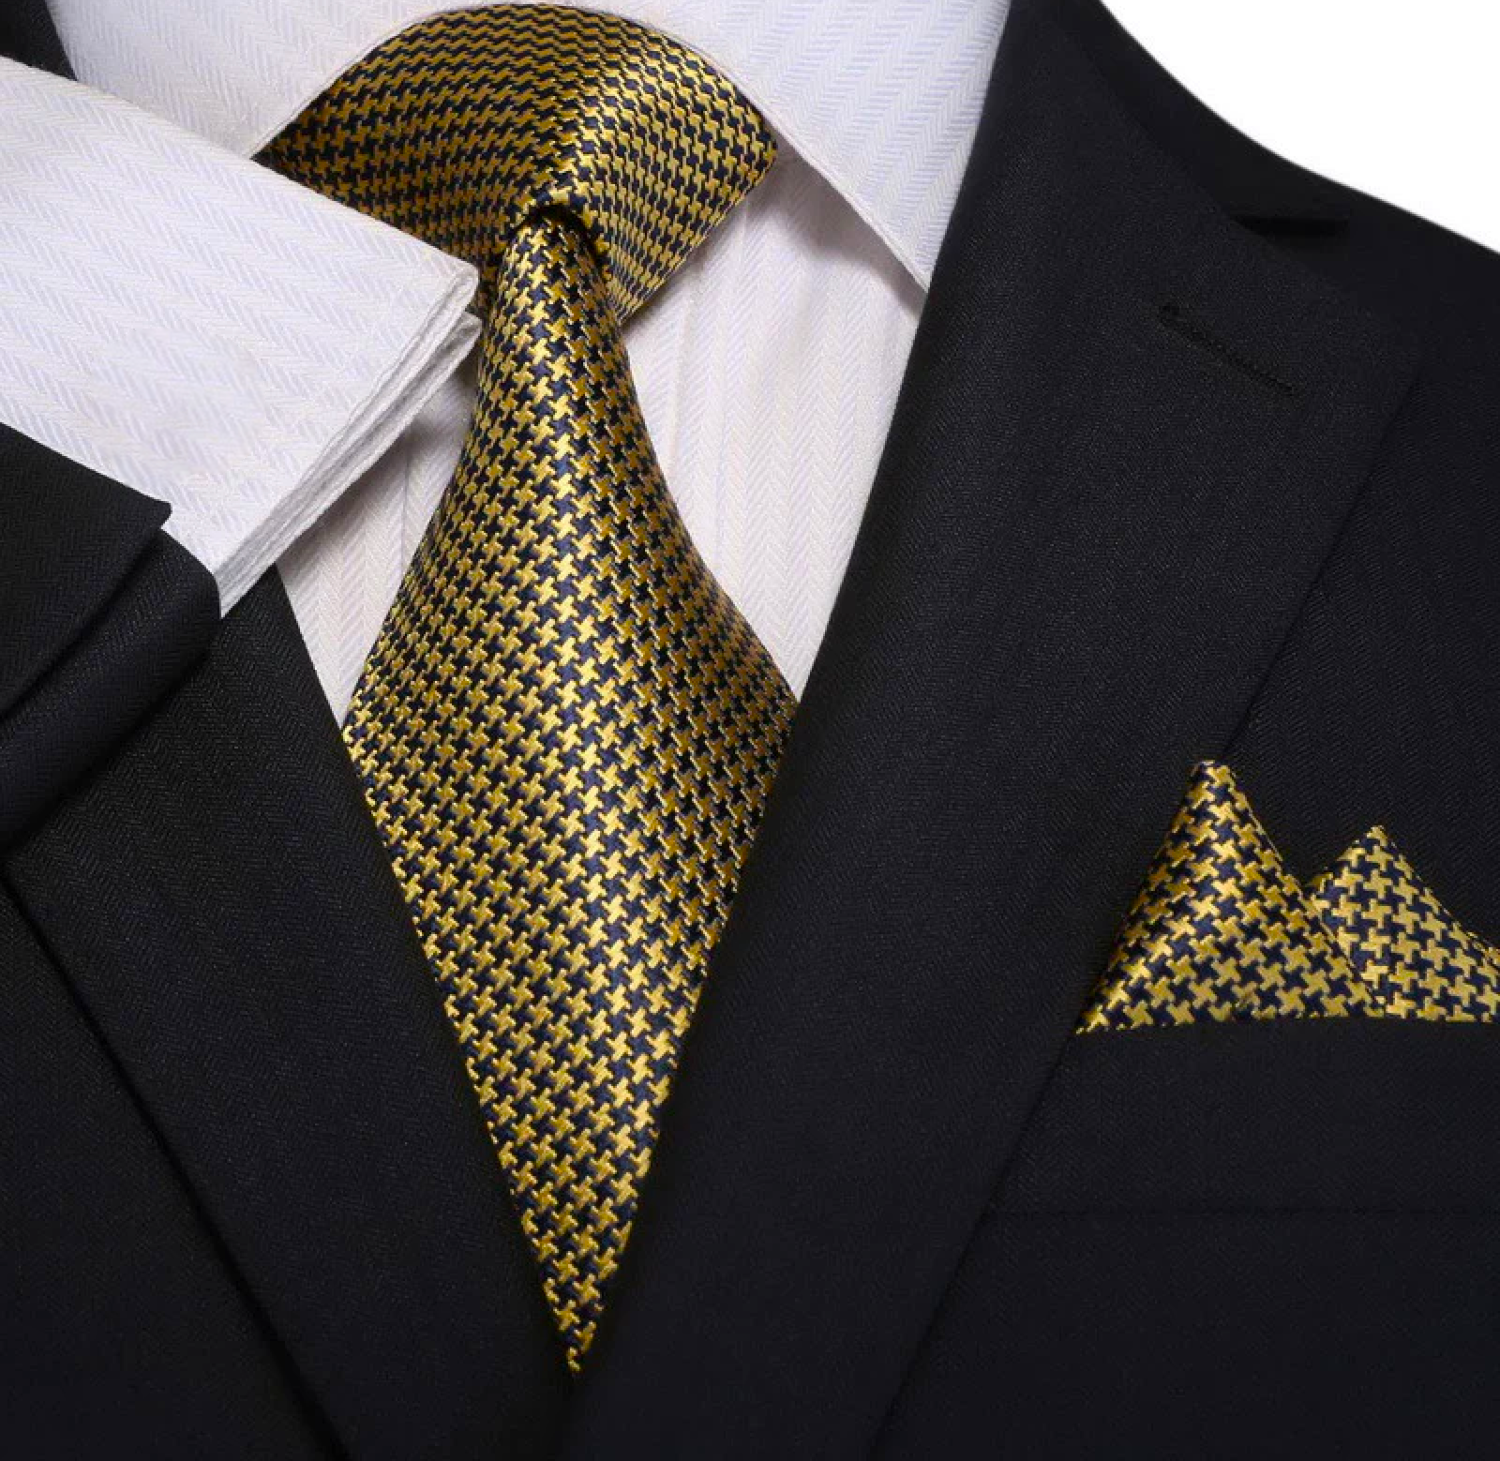 Main: Gold, Blue Hounds Tooth Tie and Pocket Square||Gold/Blue